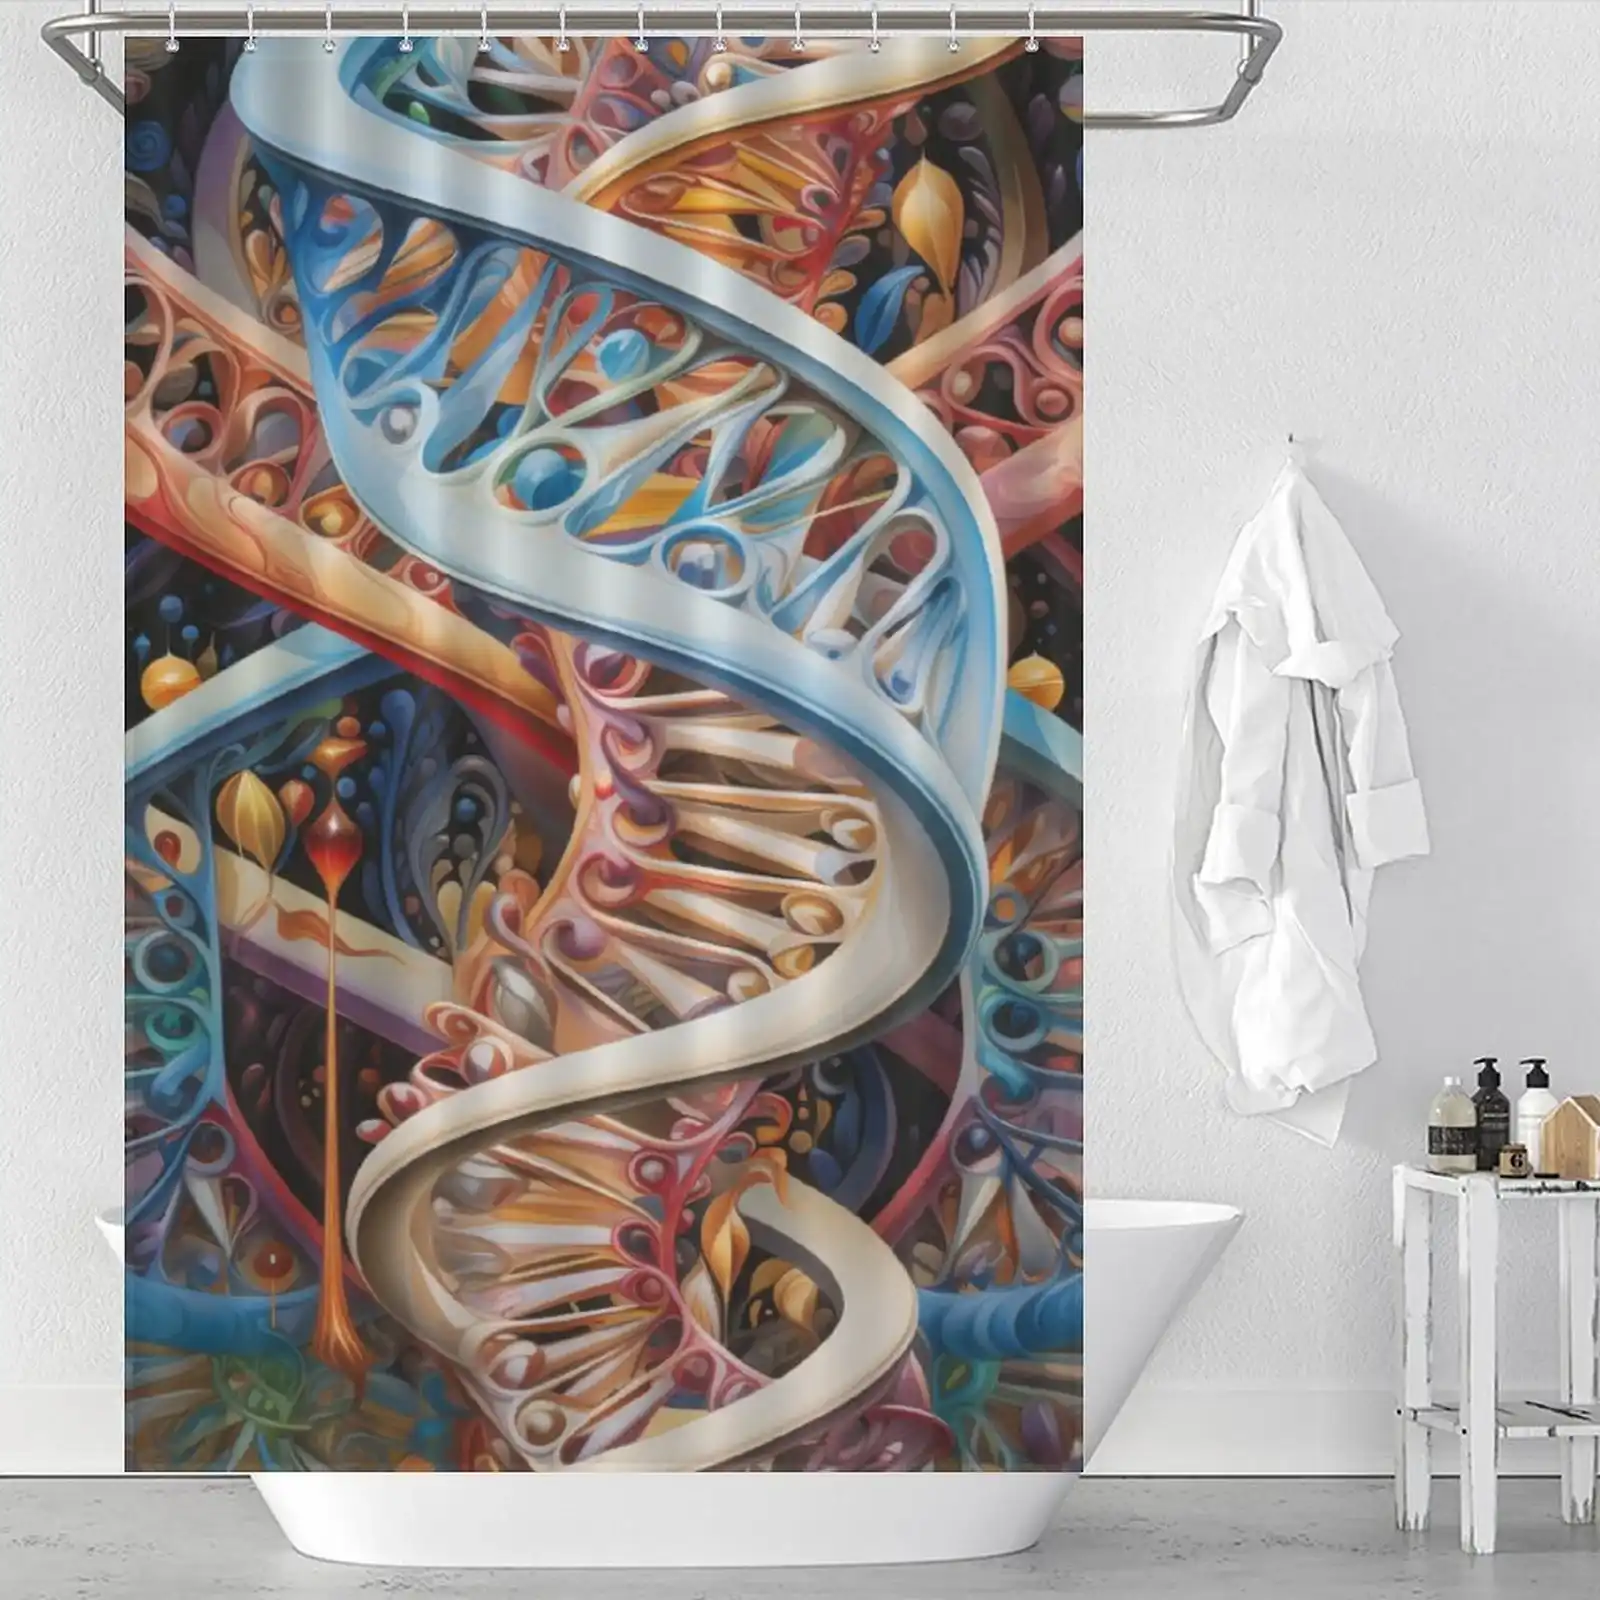 Unique Shower Curtains for Small Bathrooms: Dna strands shower curtain.